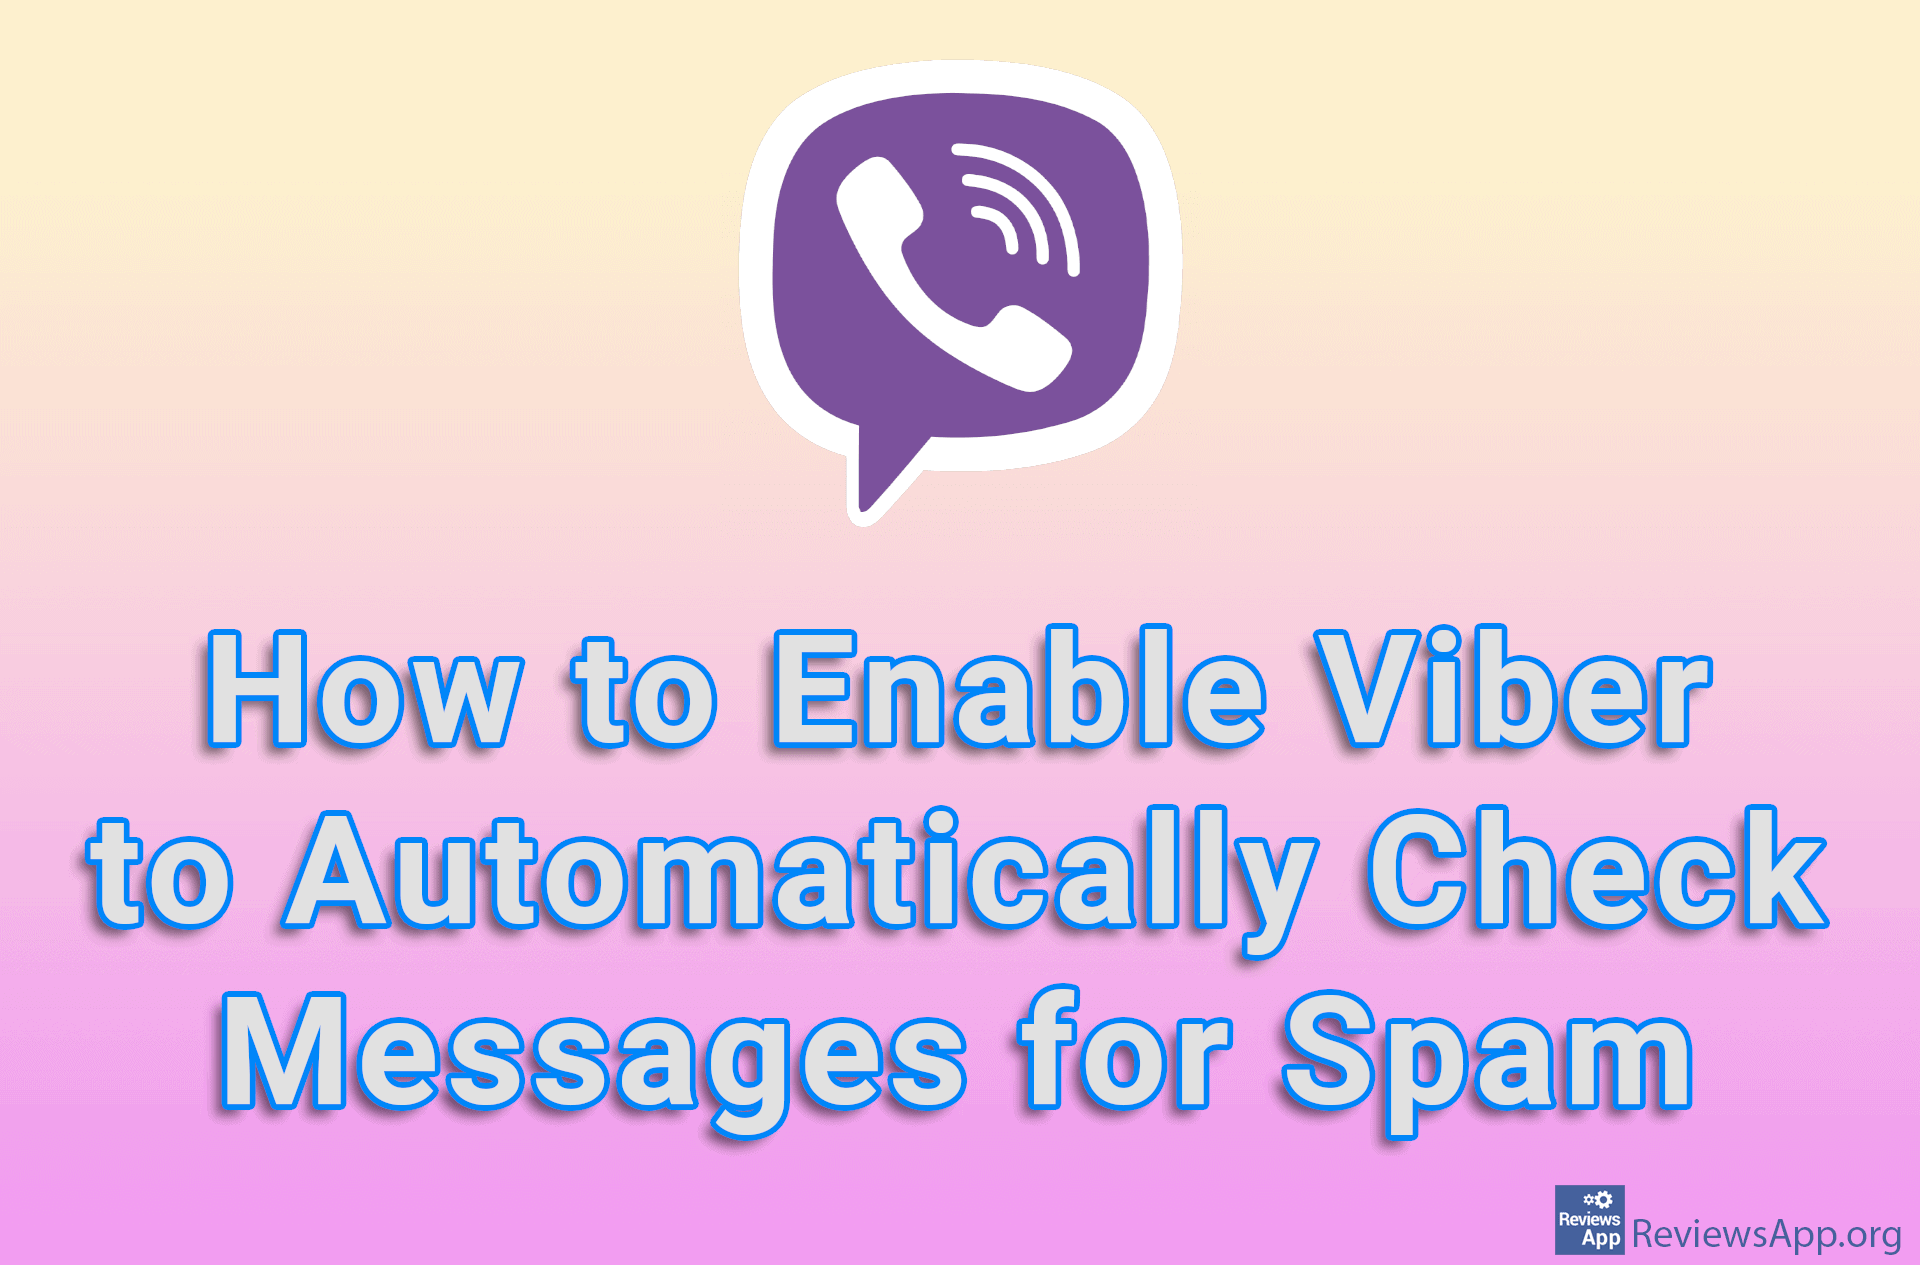 How to Enable Viber to Automatically Check Messages for Spam